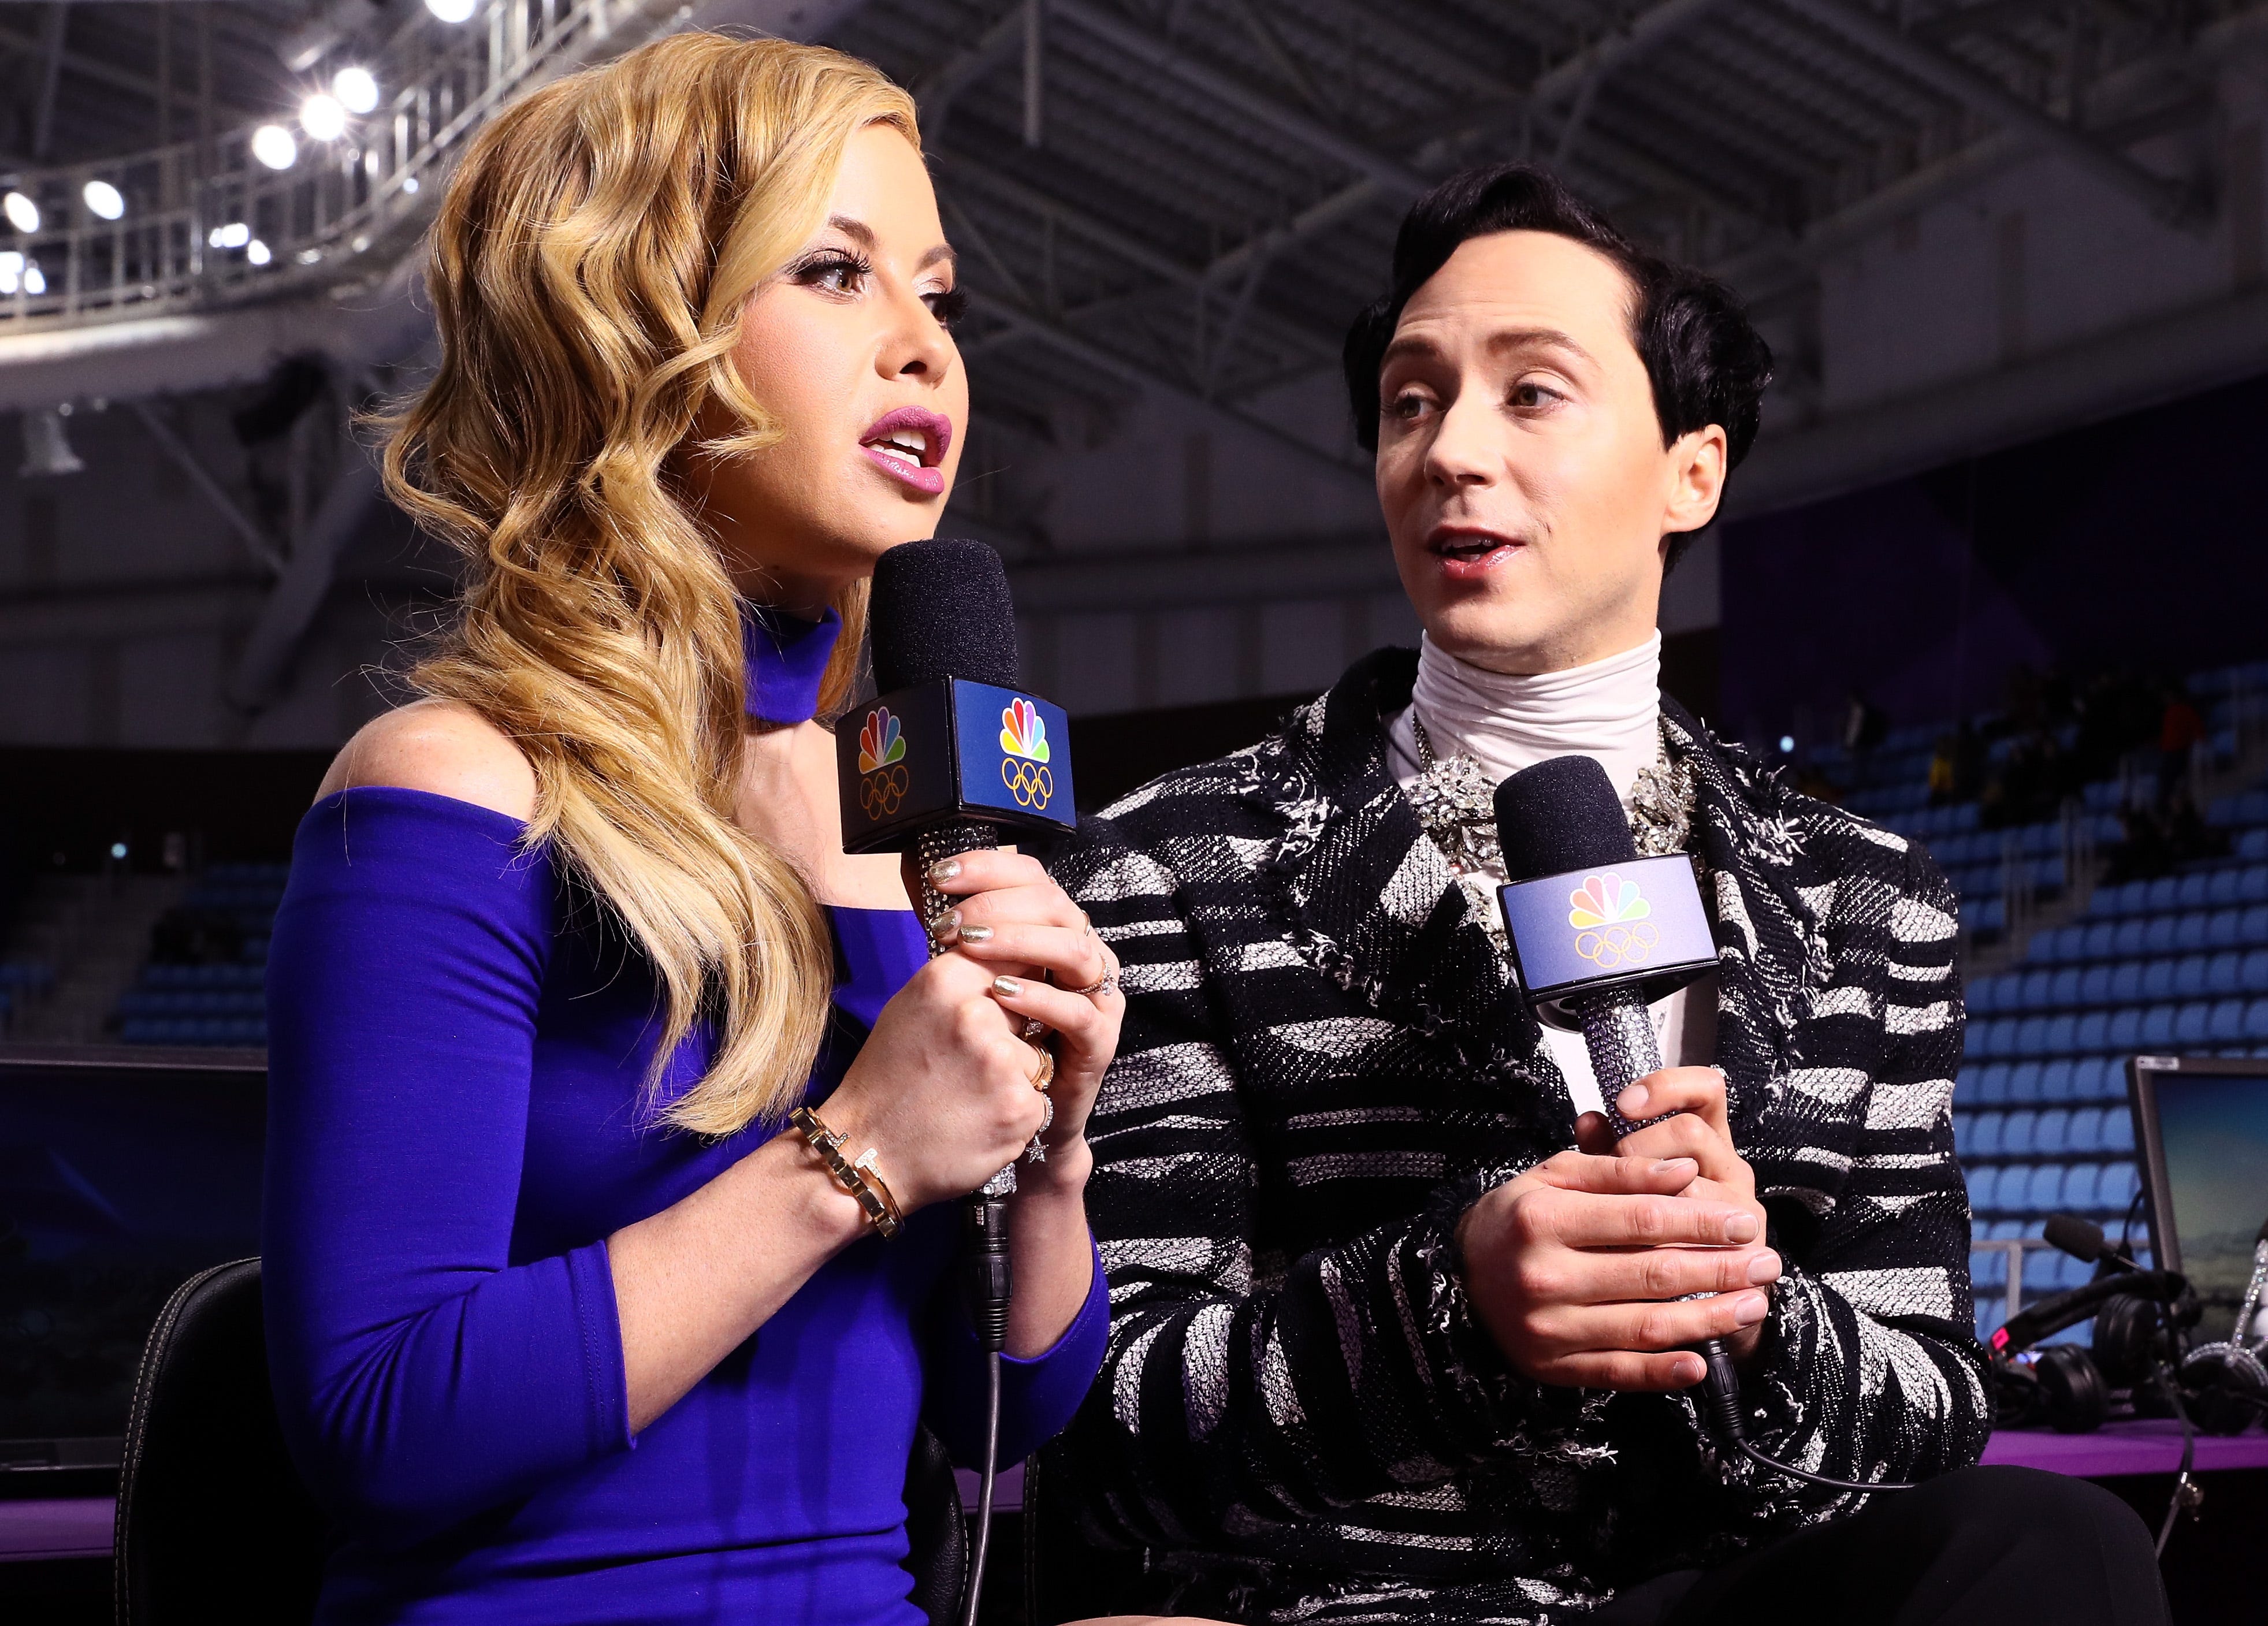 Figure skating announcers Tara Lipinski and Johnny Weir prepare for the start of the pair skating short program on day five of the PyeongChang 2018 Winter Olympics at Gangneung Ice Arena on Feb. 14, 2018, in Gangneung, South Korea.